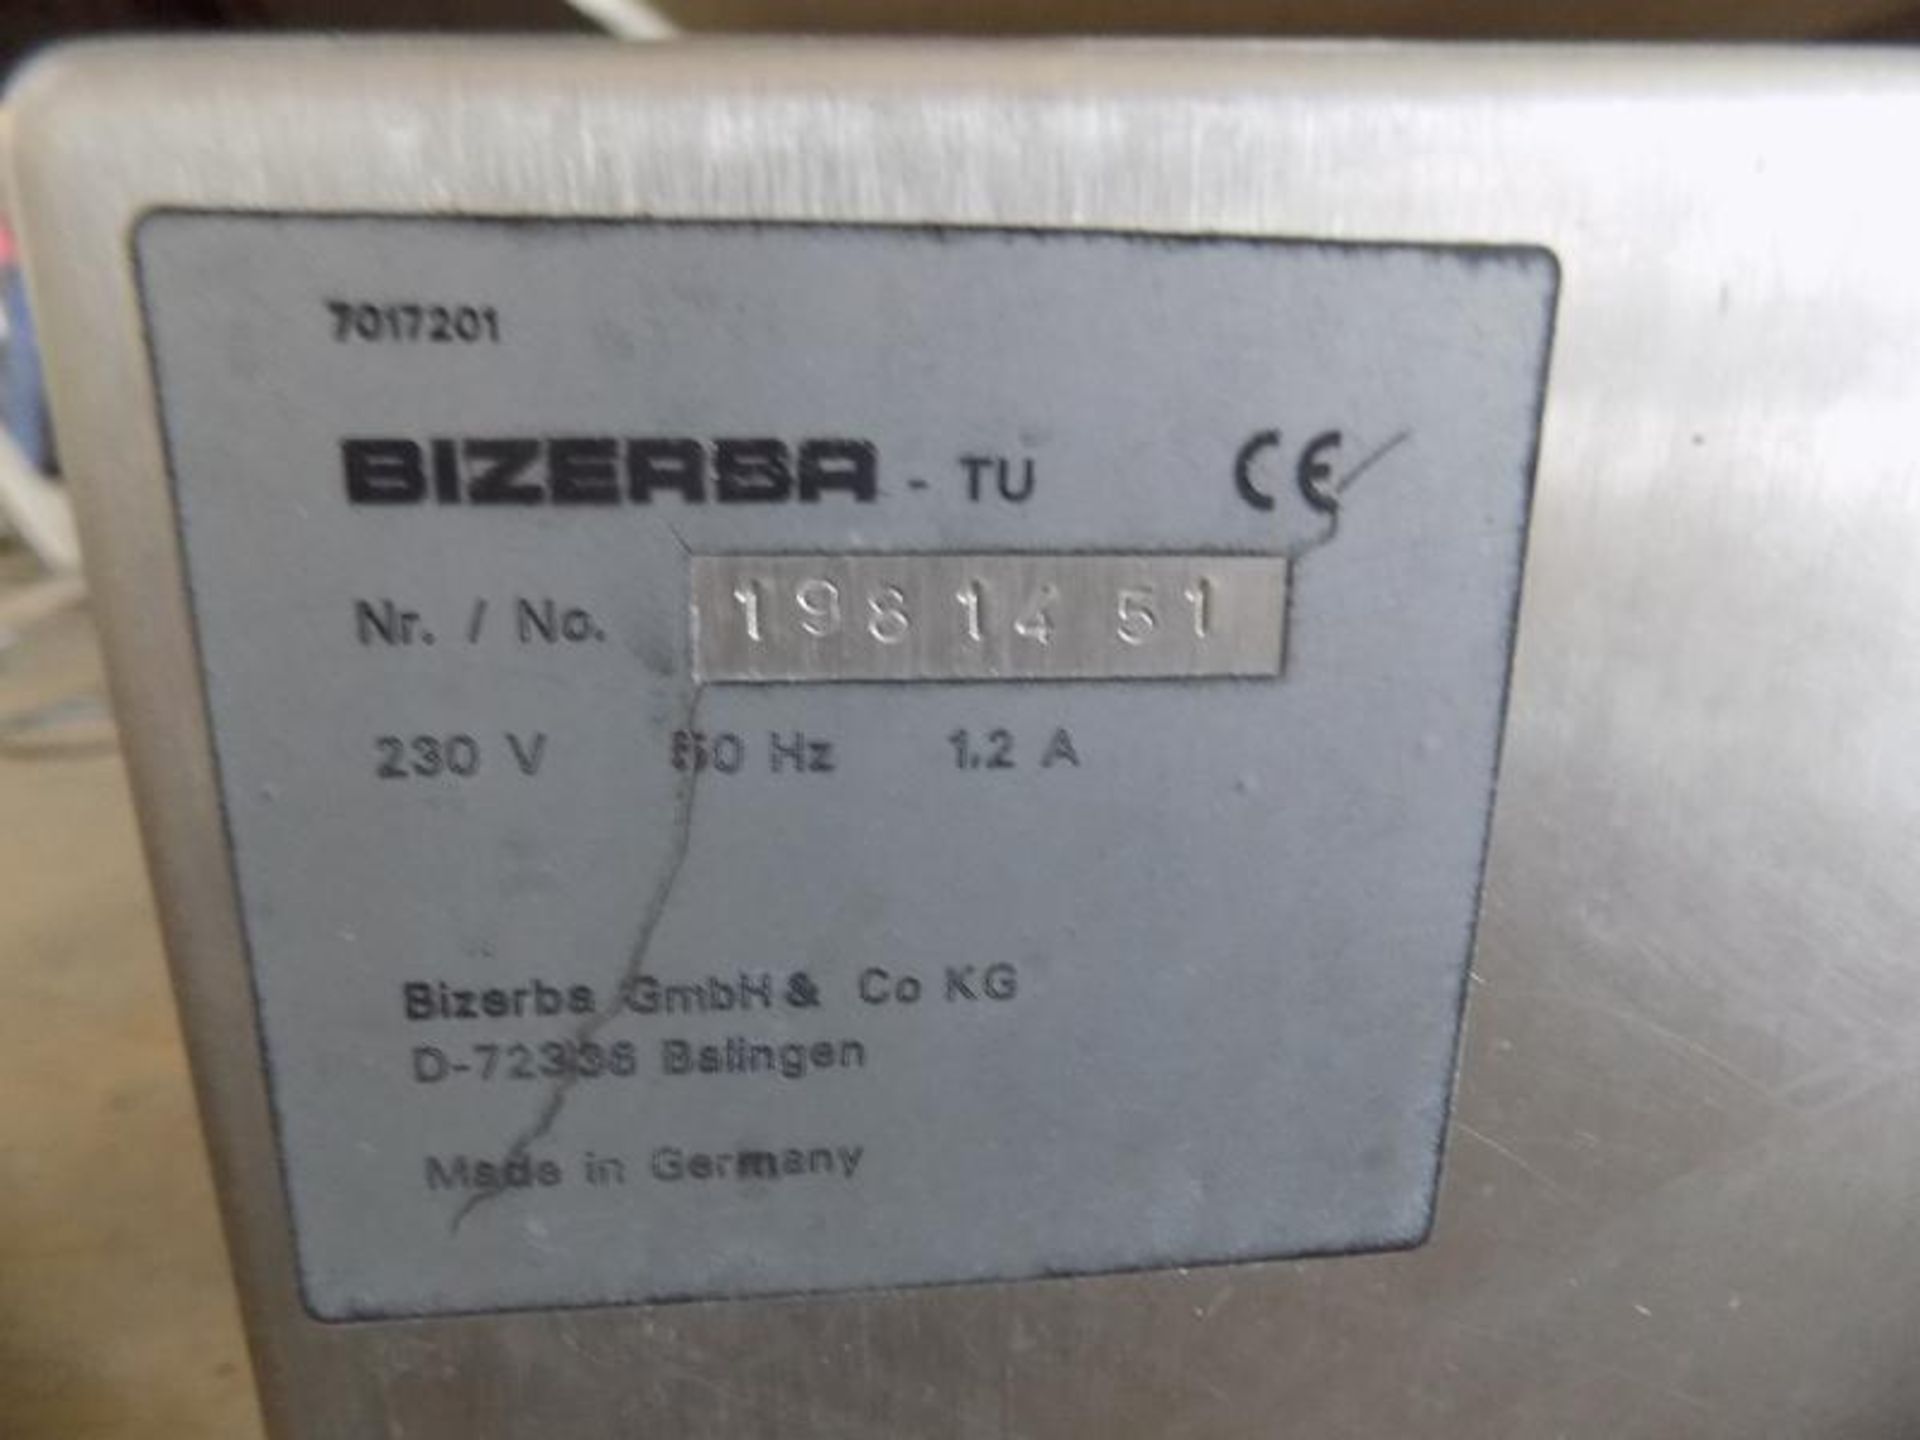 Bizerba Teflon Roll and Belt Conveyor, S/N 1981461 with Air Operated Divider and VFD, 230 V (Overall - Image 3 of 3